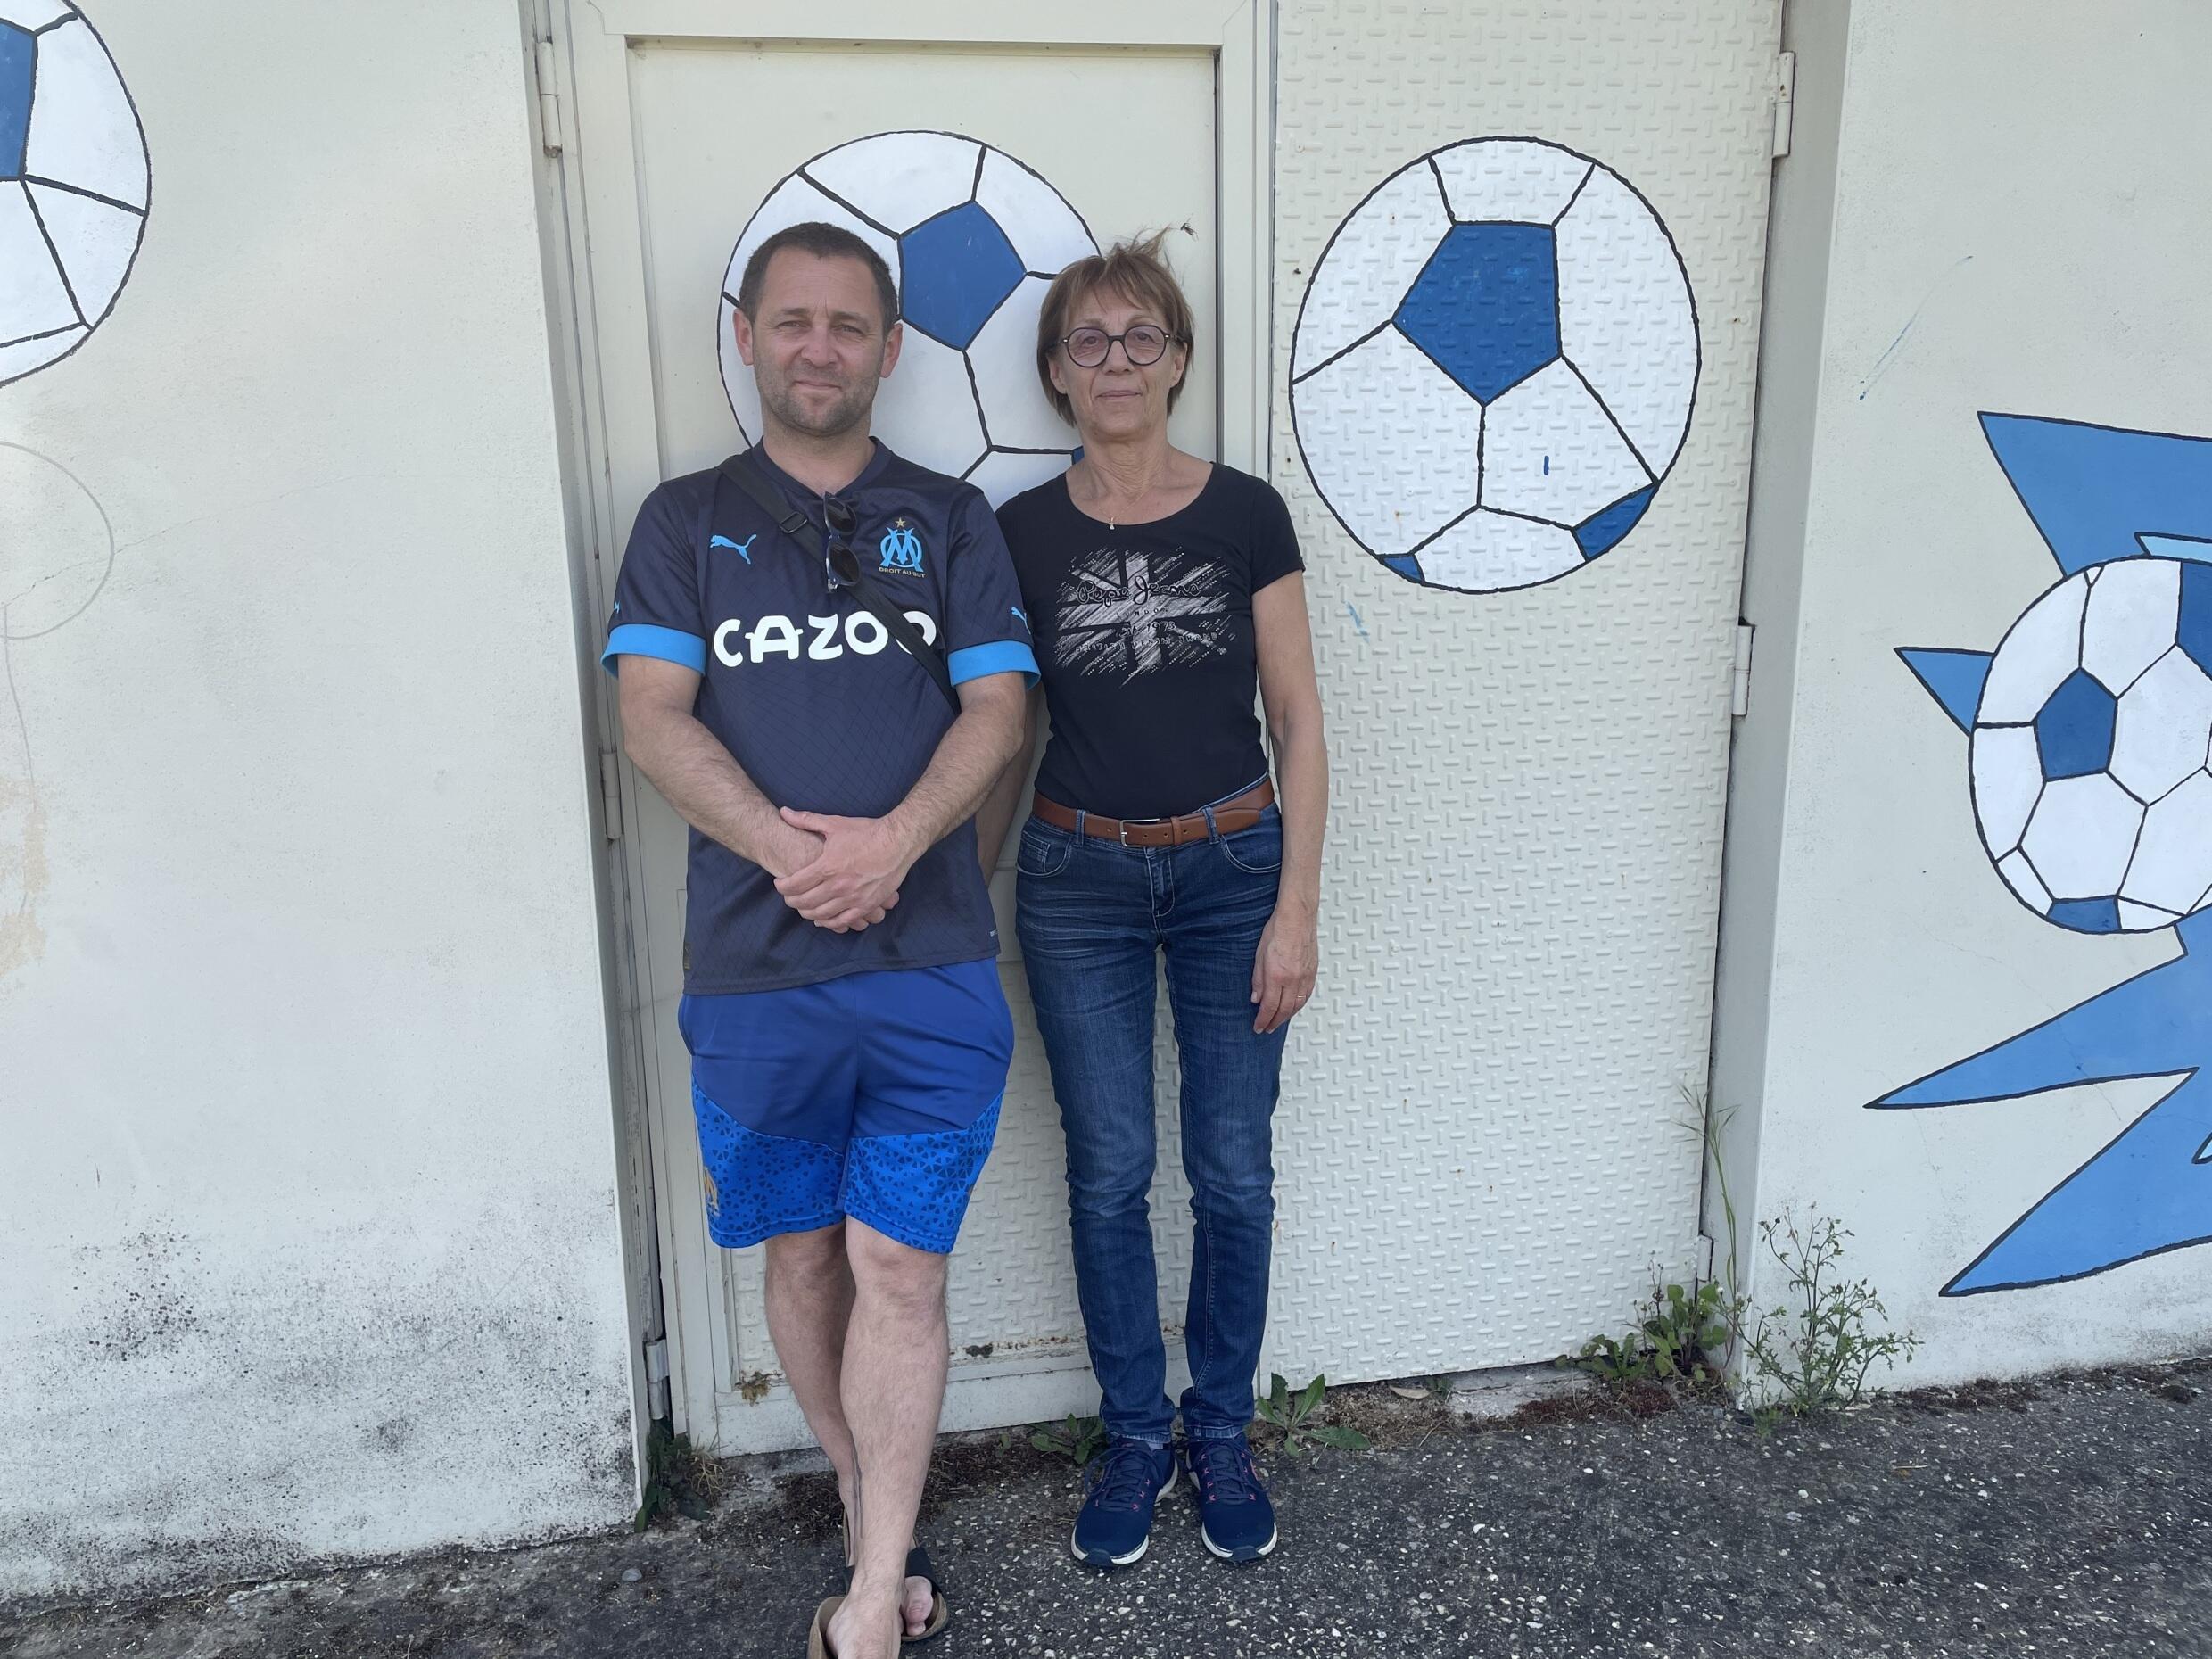 Clarisse Guinoiseau and her son Freddy, just in front of the locker rooms of the L'Huisserie club.